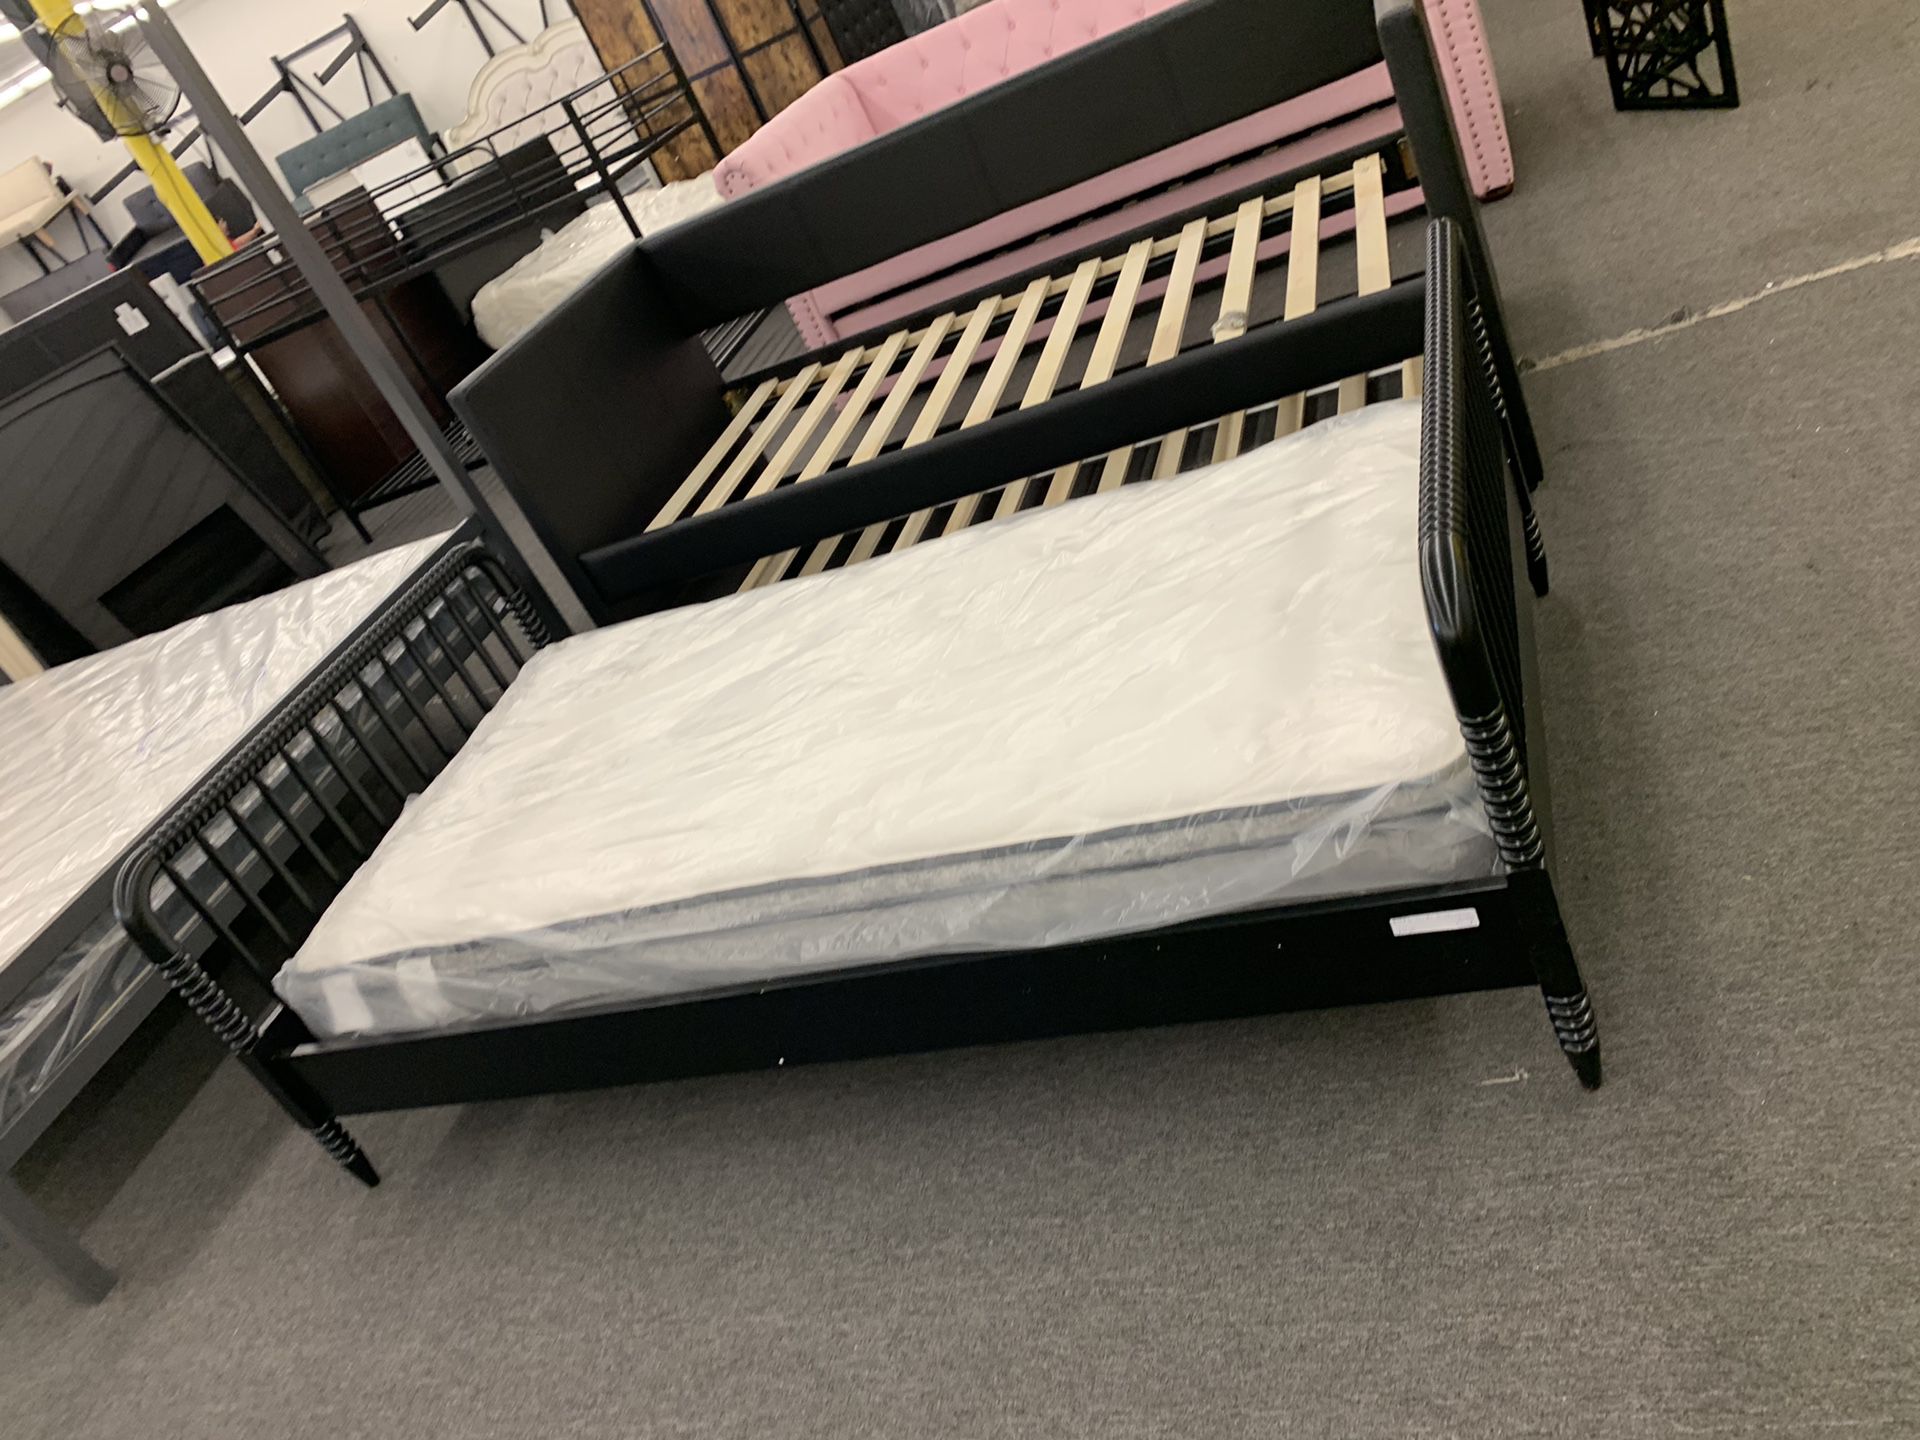 Little Seeds Rowan Valley Linden Twin-Size Bed Brand Nameby Little Seeds Bed Frame $125 With *ttress $200 Jm